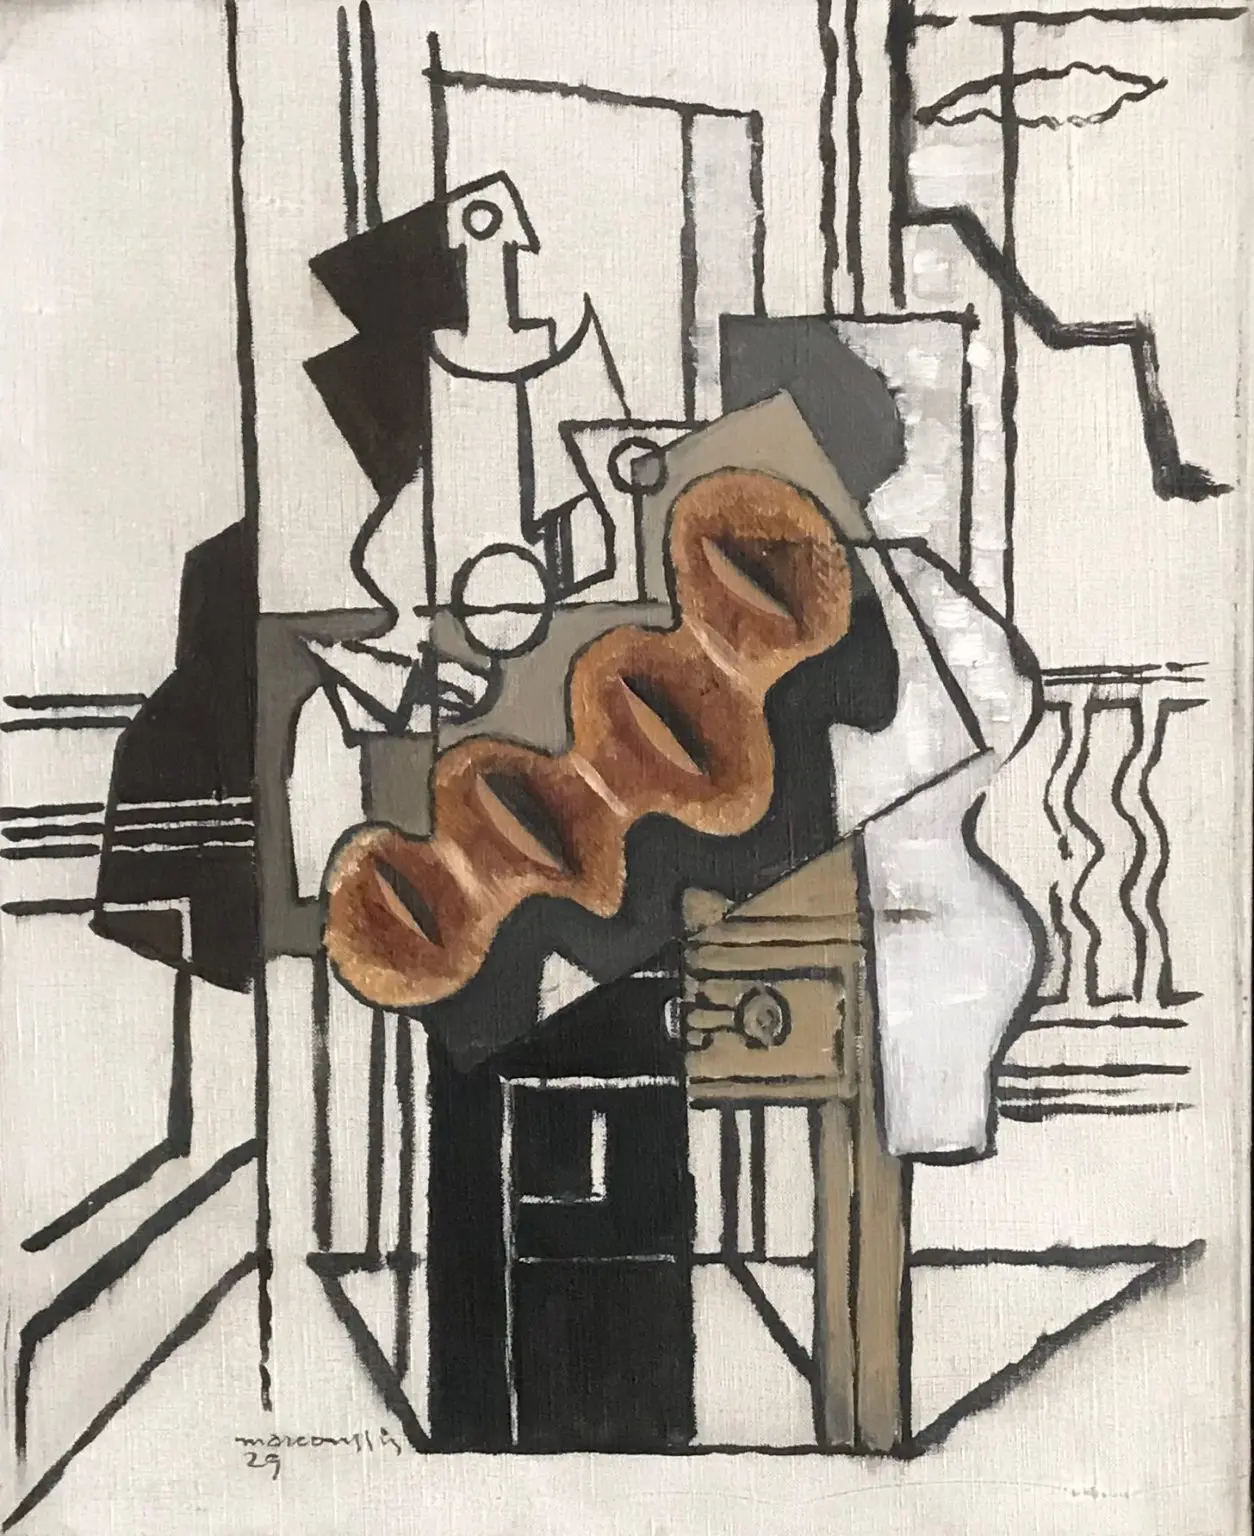 Louis Markus MARCOUSSIS (1883-1941), *Gueridon devant le balcon*, 1929, Signed and dated lower left: 'marcoussis 29', Oil on canvas, 41.3 x 33.2 cm; 16 ¼ x 13 1/8 inches